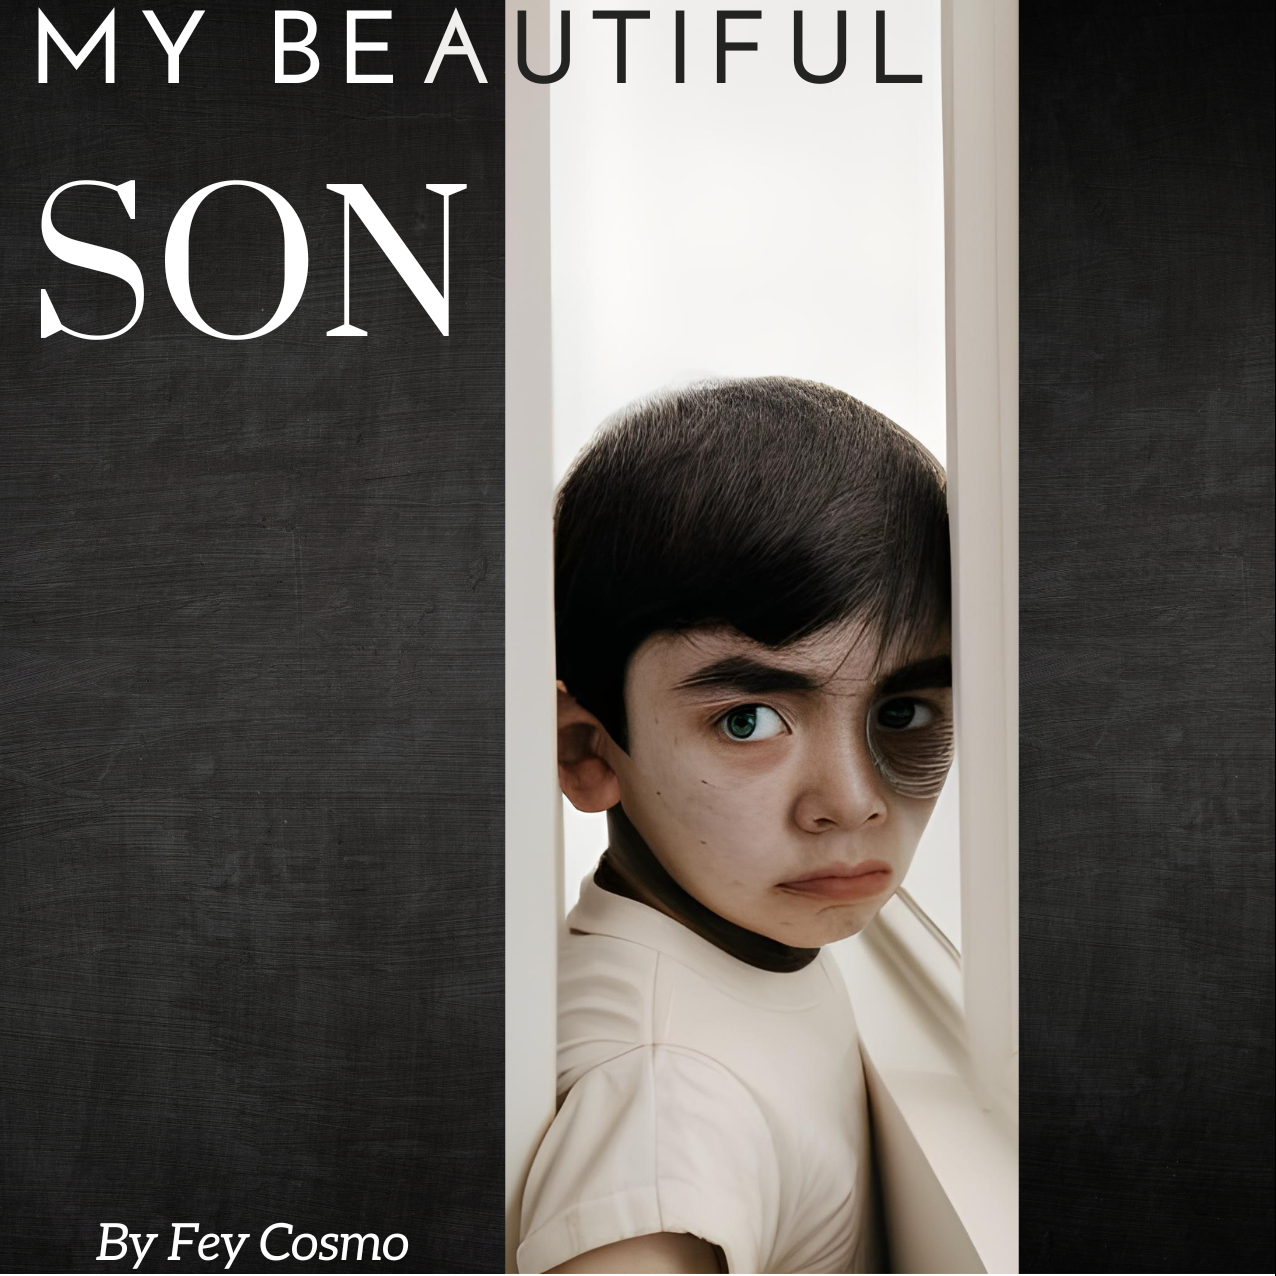 My Beautiful Son: A tale of horror (PART TWO)